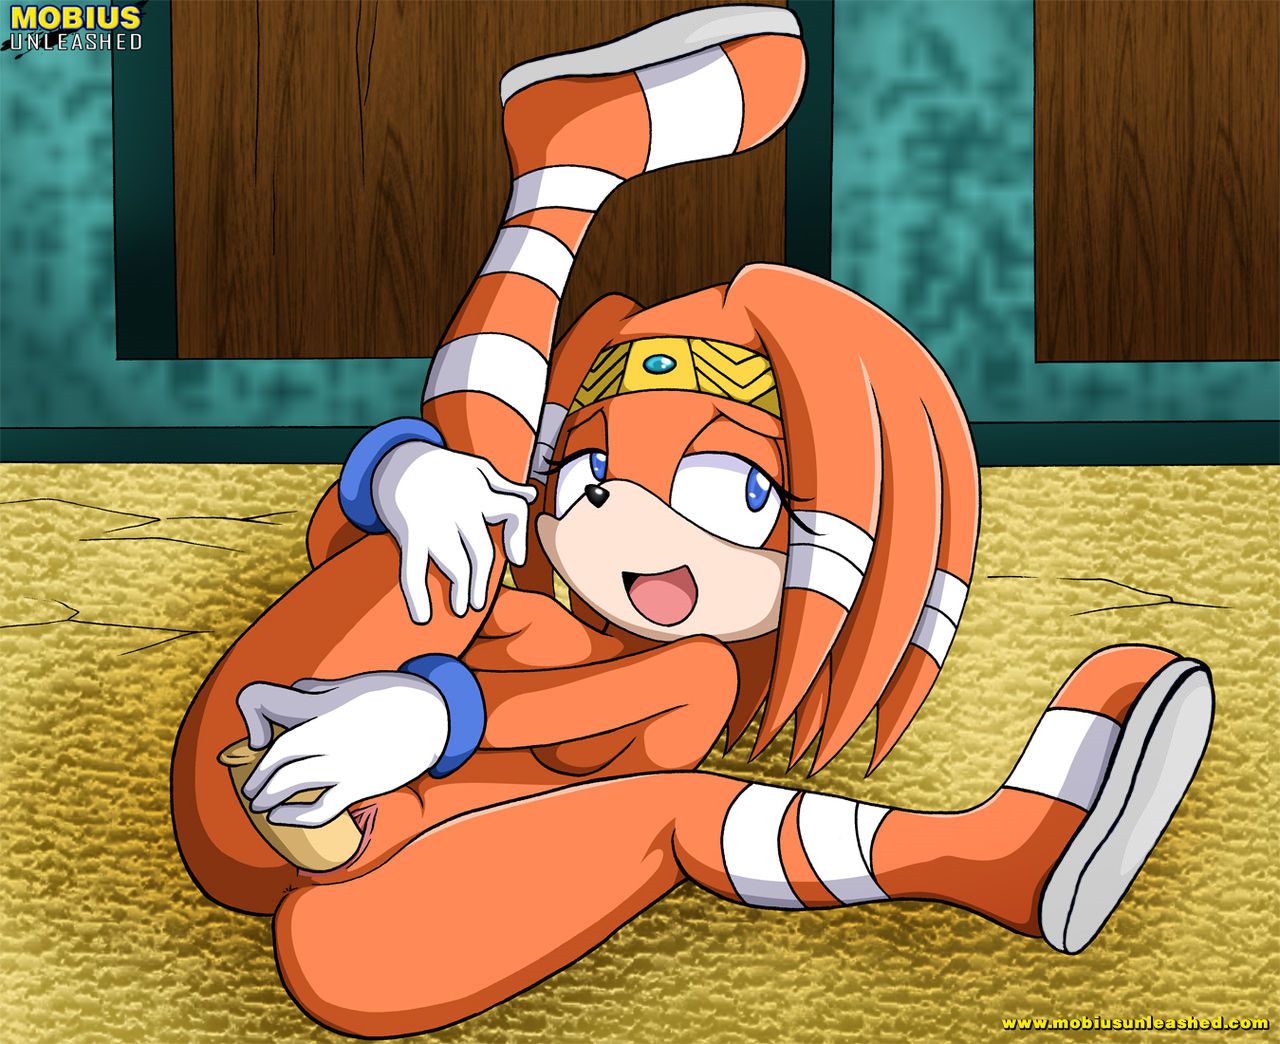 Mobius Unleashed: Tikal the Echidna 19